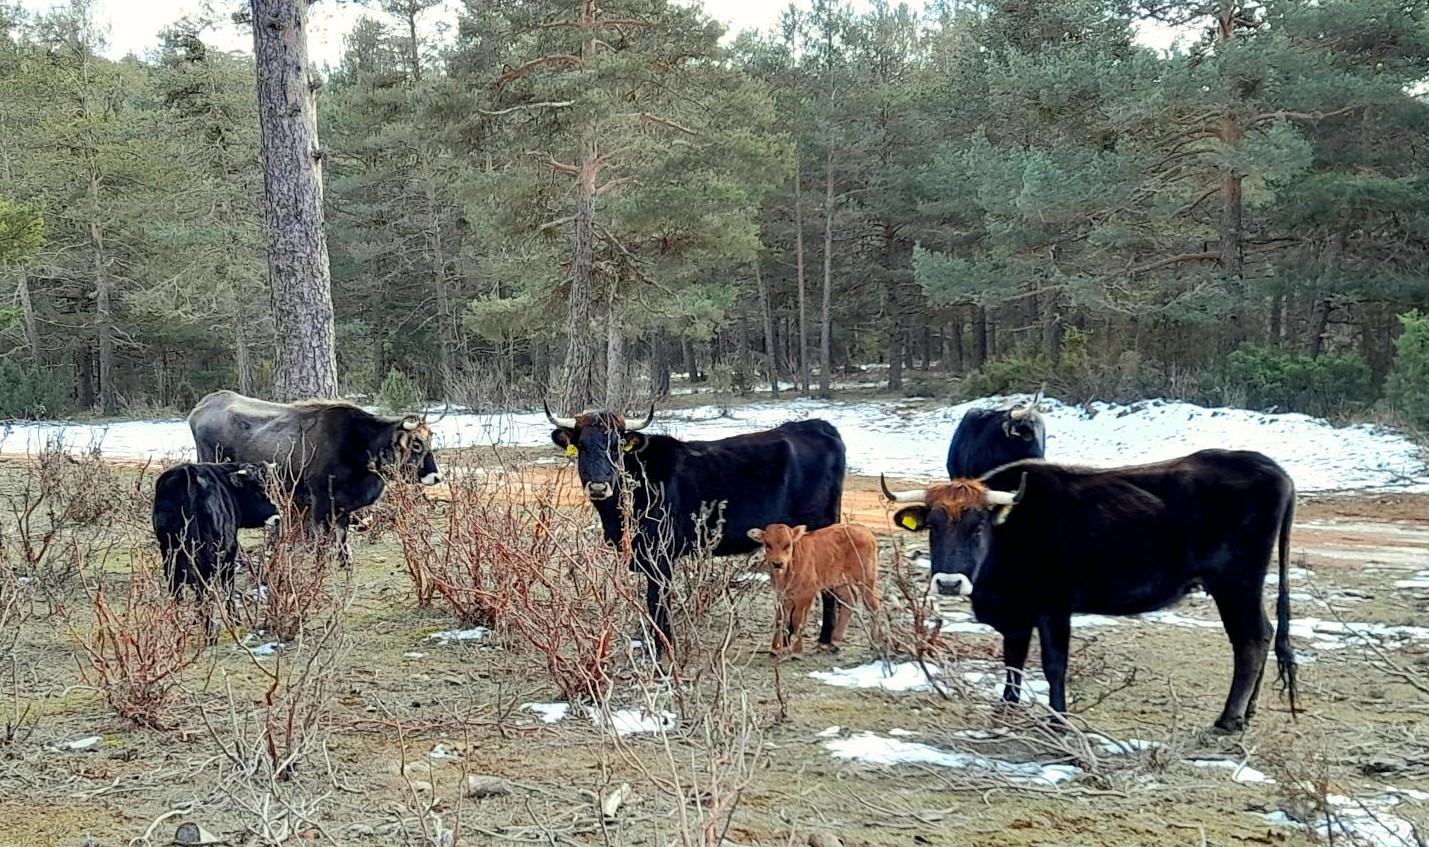 cows in the wild